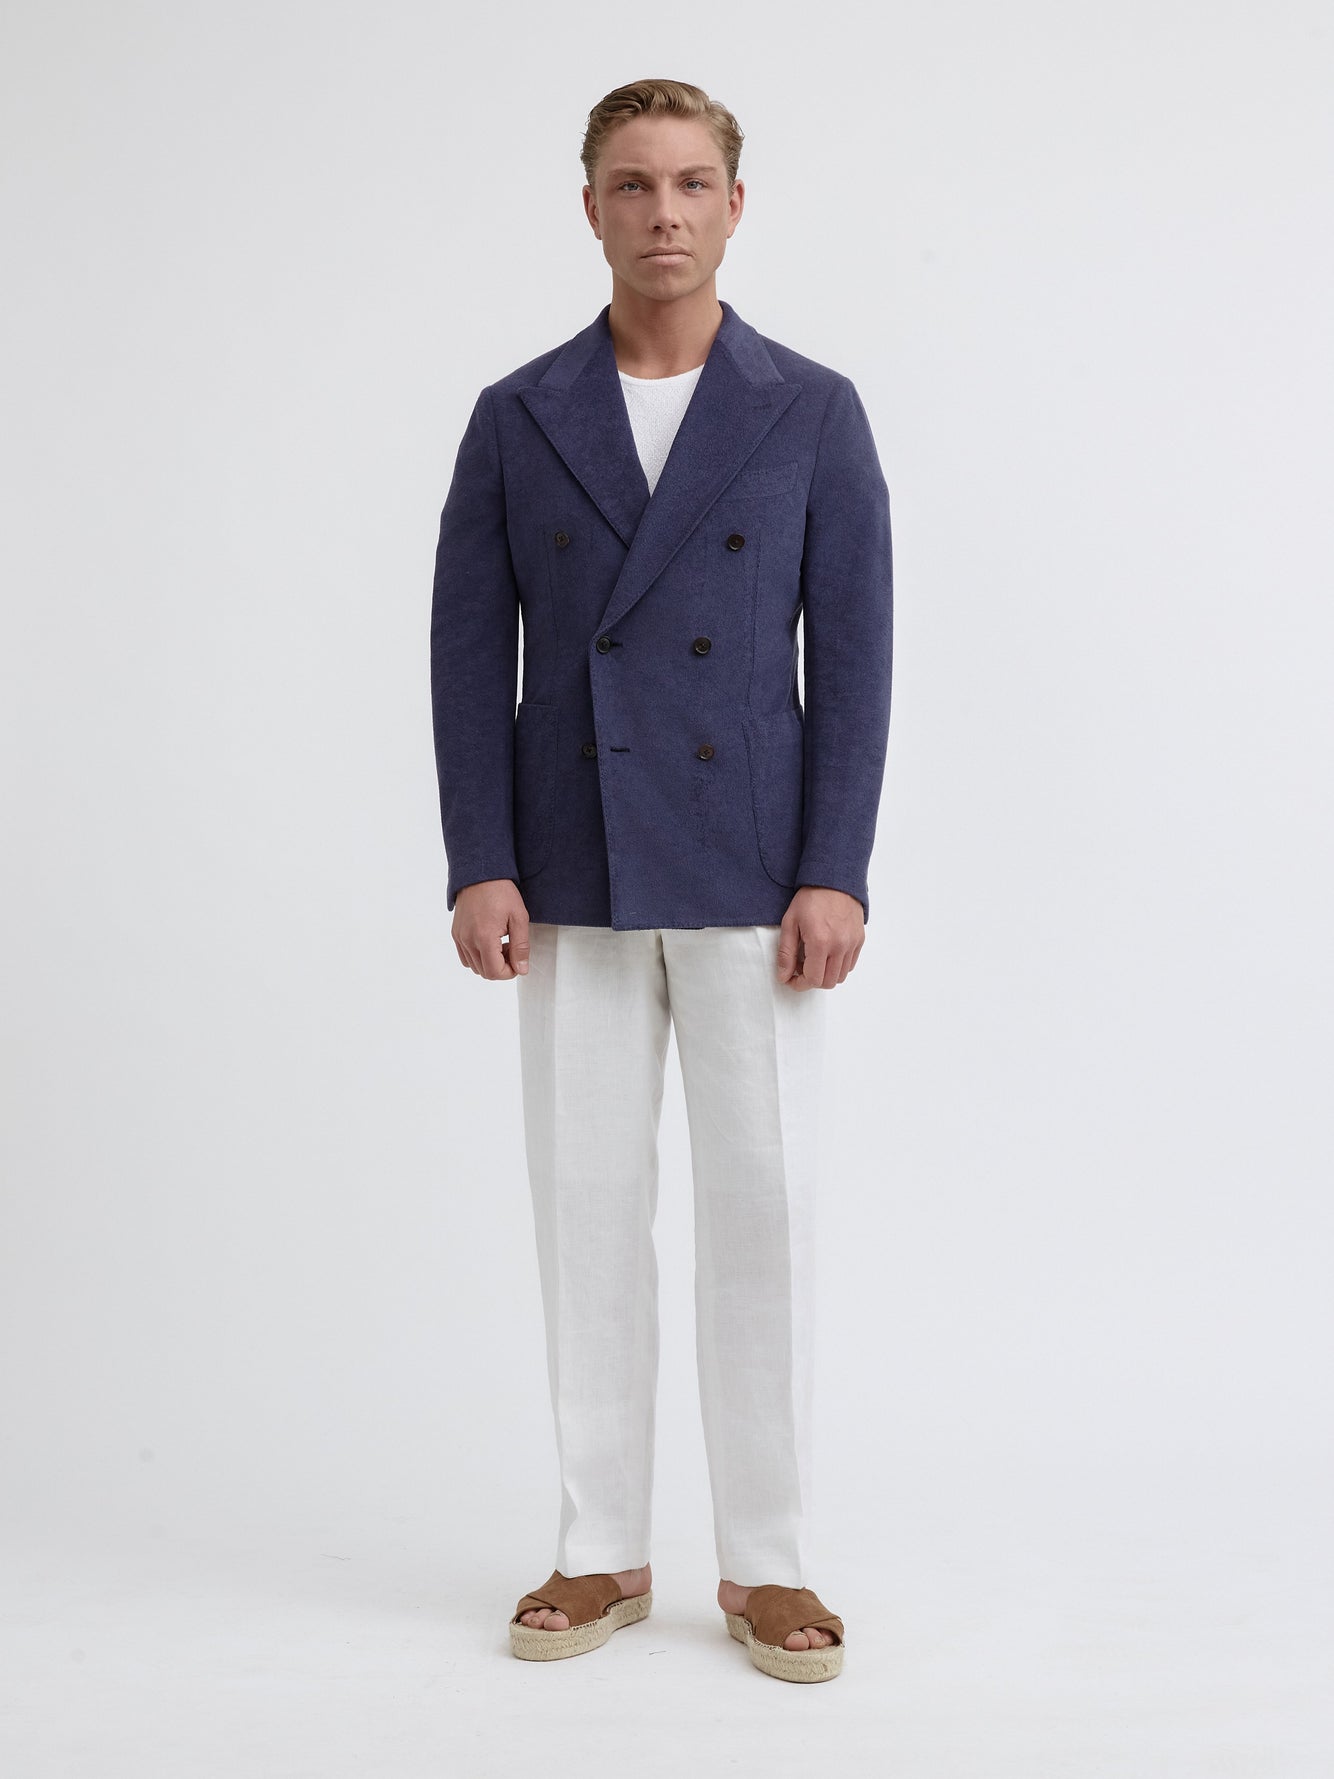 Navy Terry Towelling Jacket - Grand Le Mar